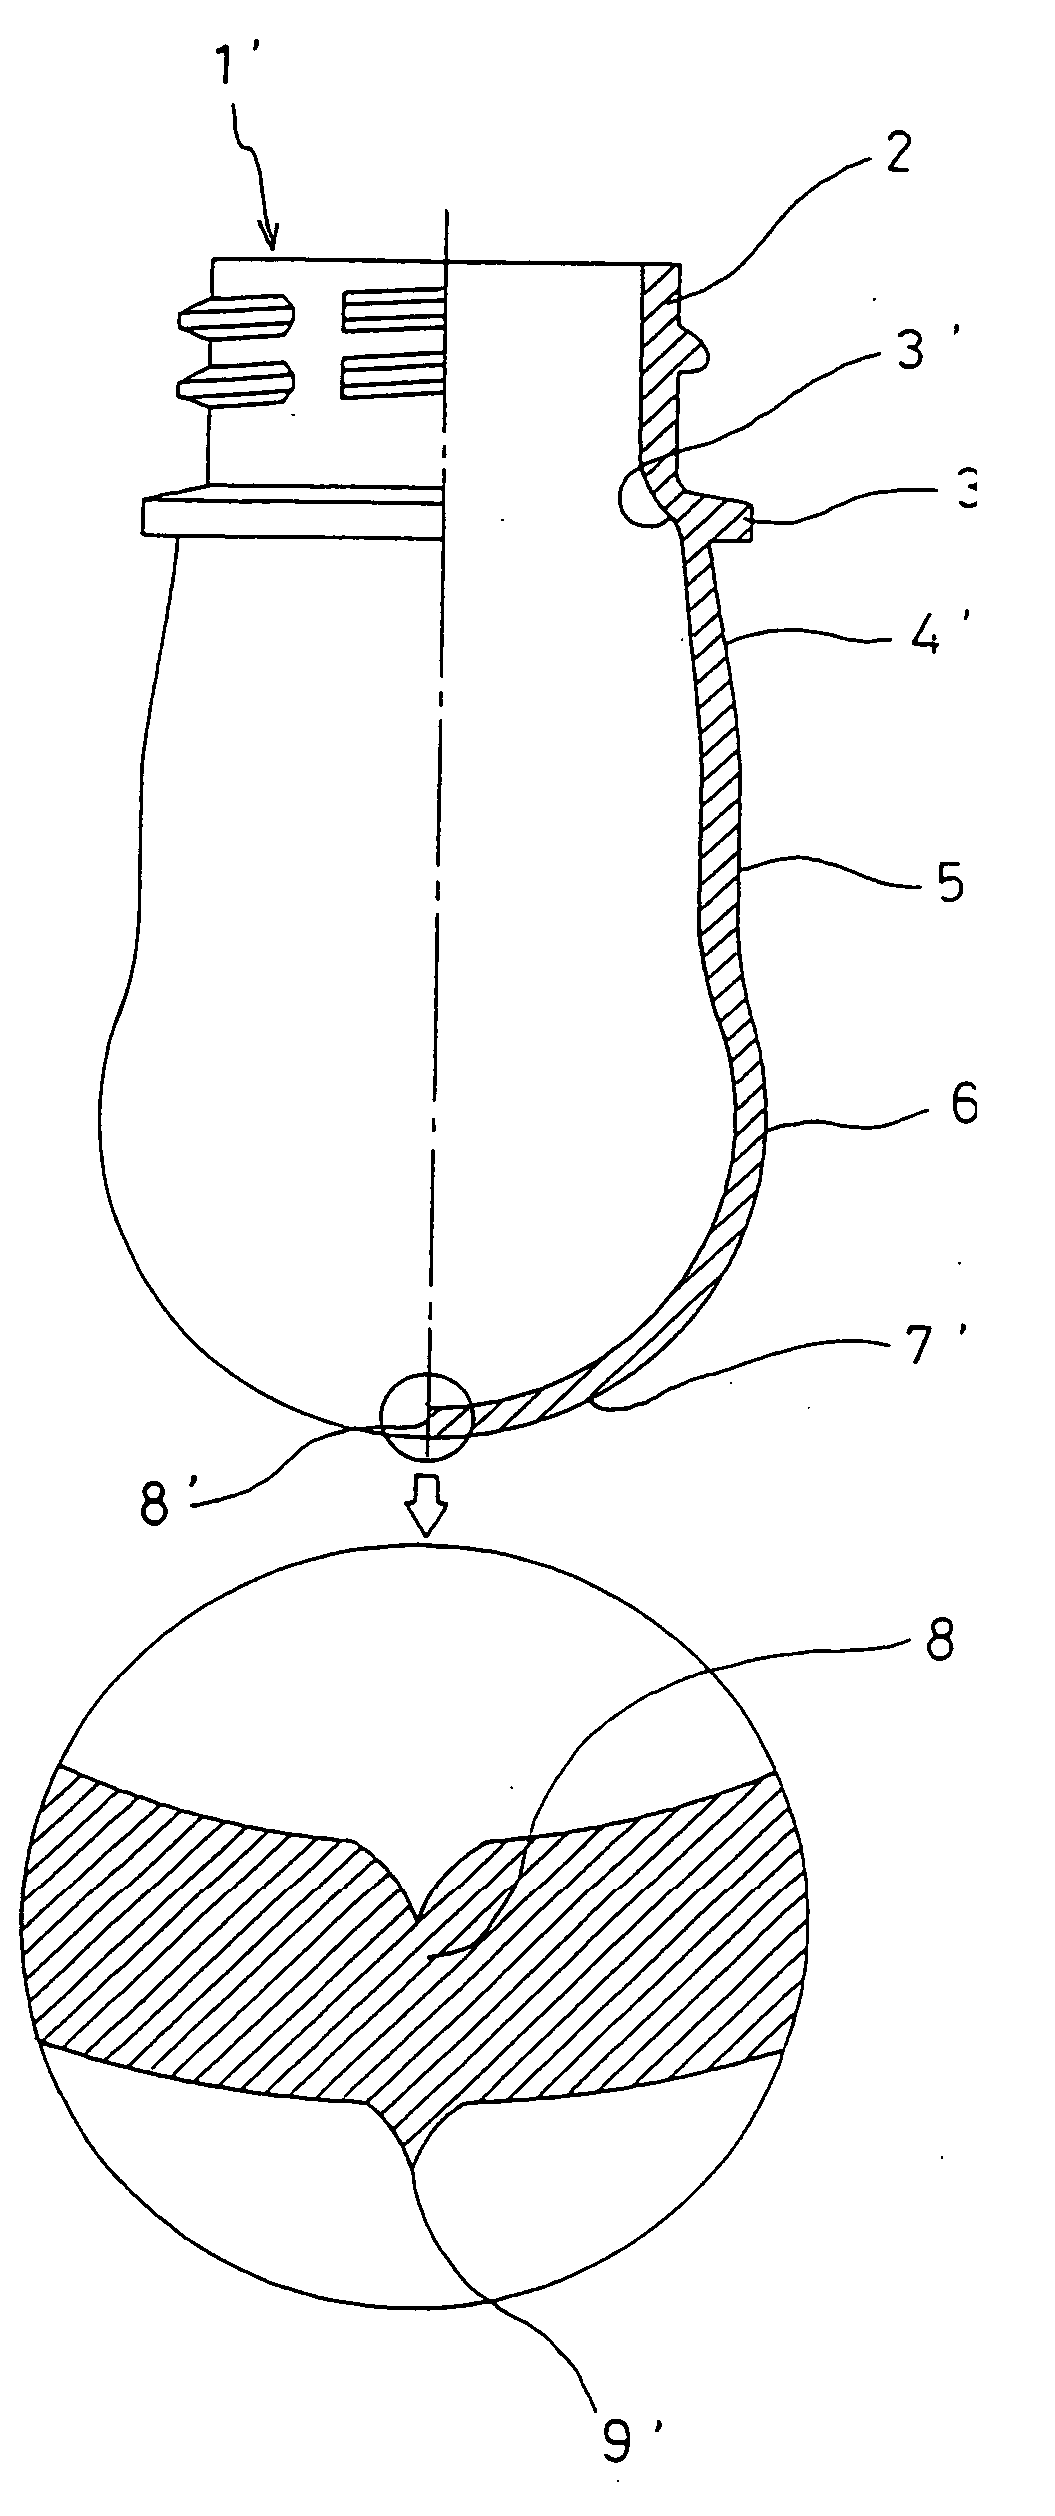 Synthetic resin preform to be biaxially stretched and blow molded into a bottle